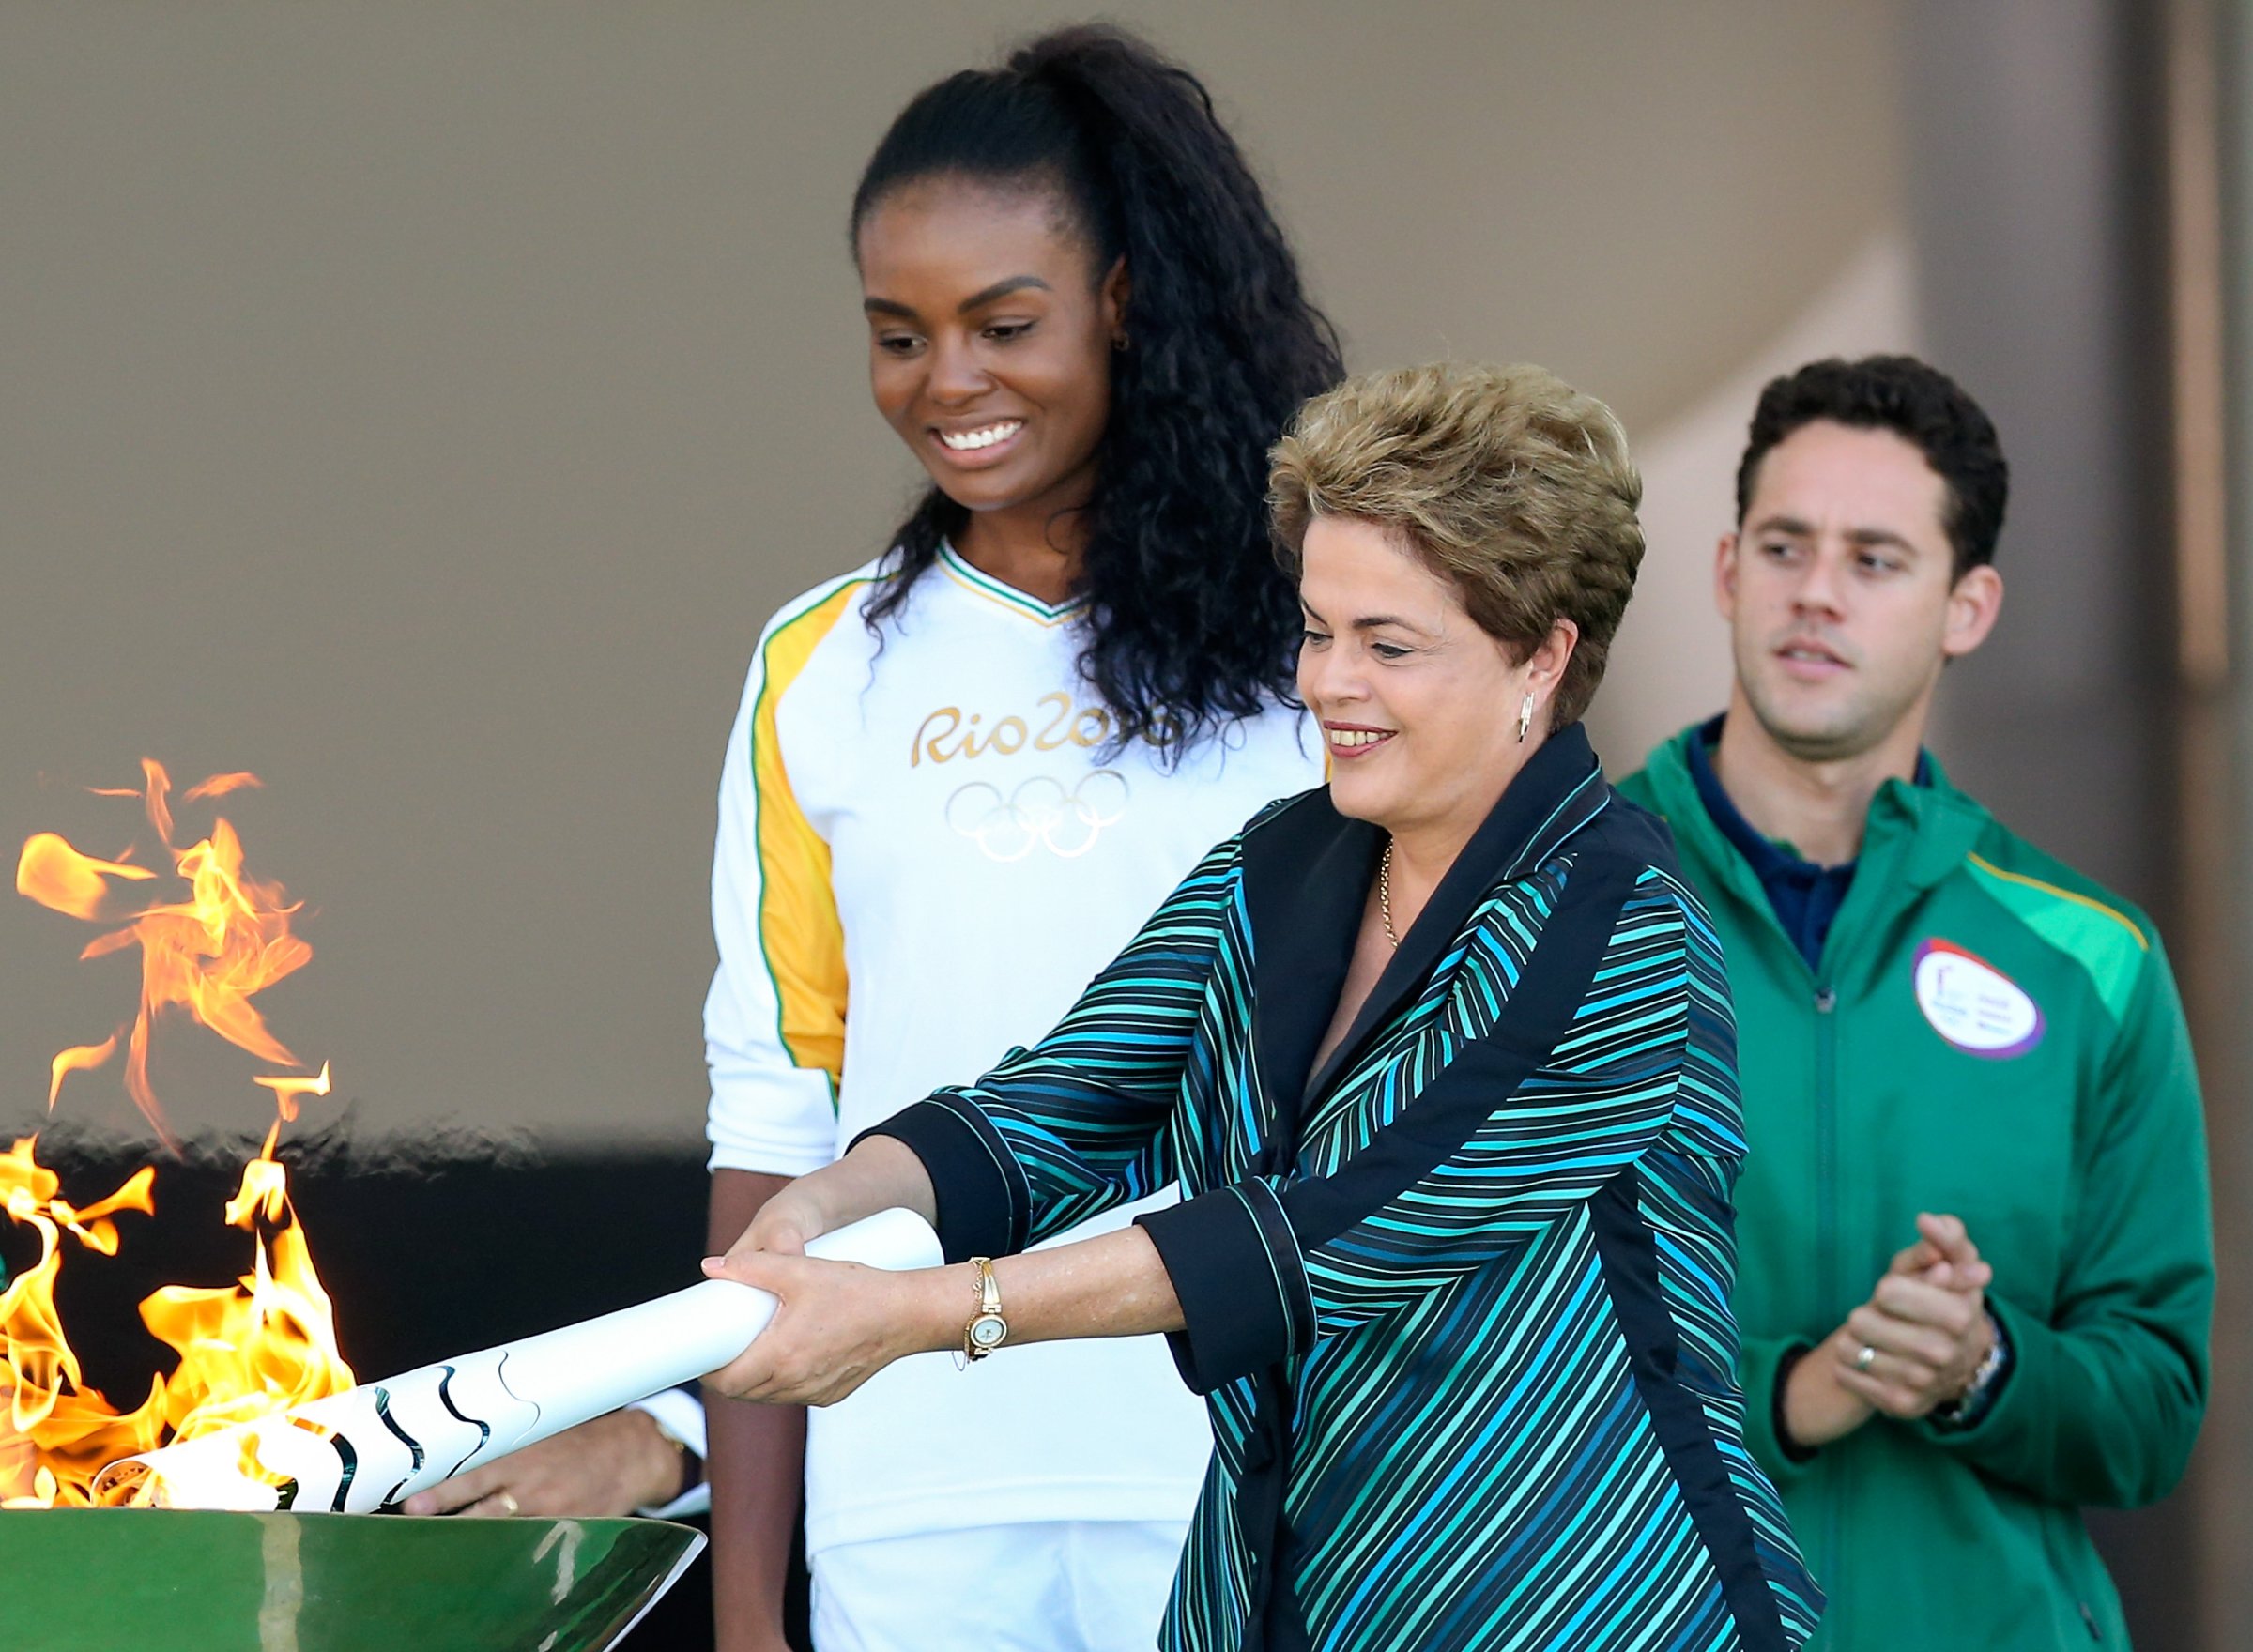 Dilma Rousseff, President of Brazil, lights the Olympic torch with the first torch bearer, volleyball player Fabiana Claudino at the Palacio do Planalto on May 3, 2016 in Brasilia, Brazil.